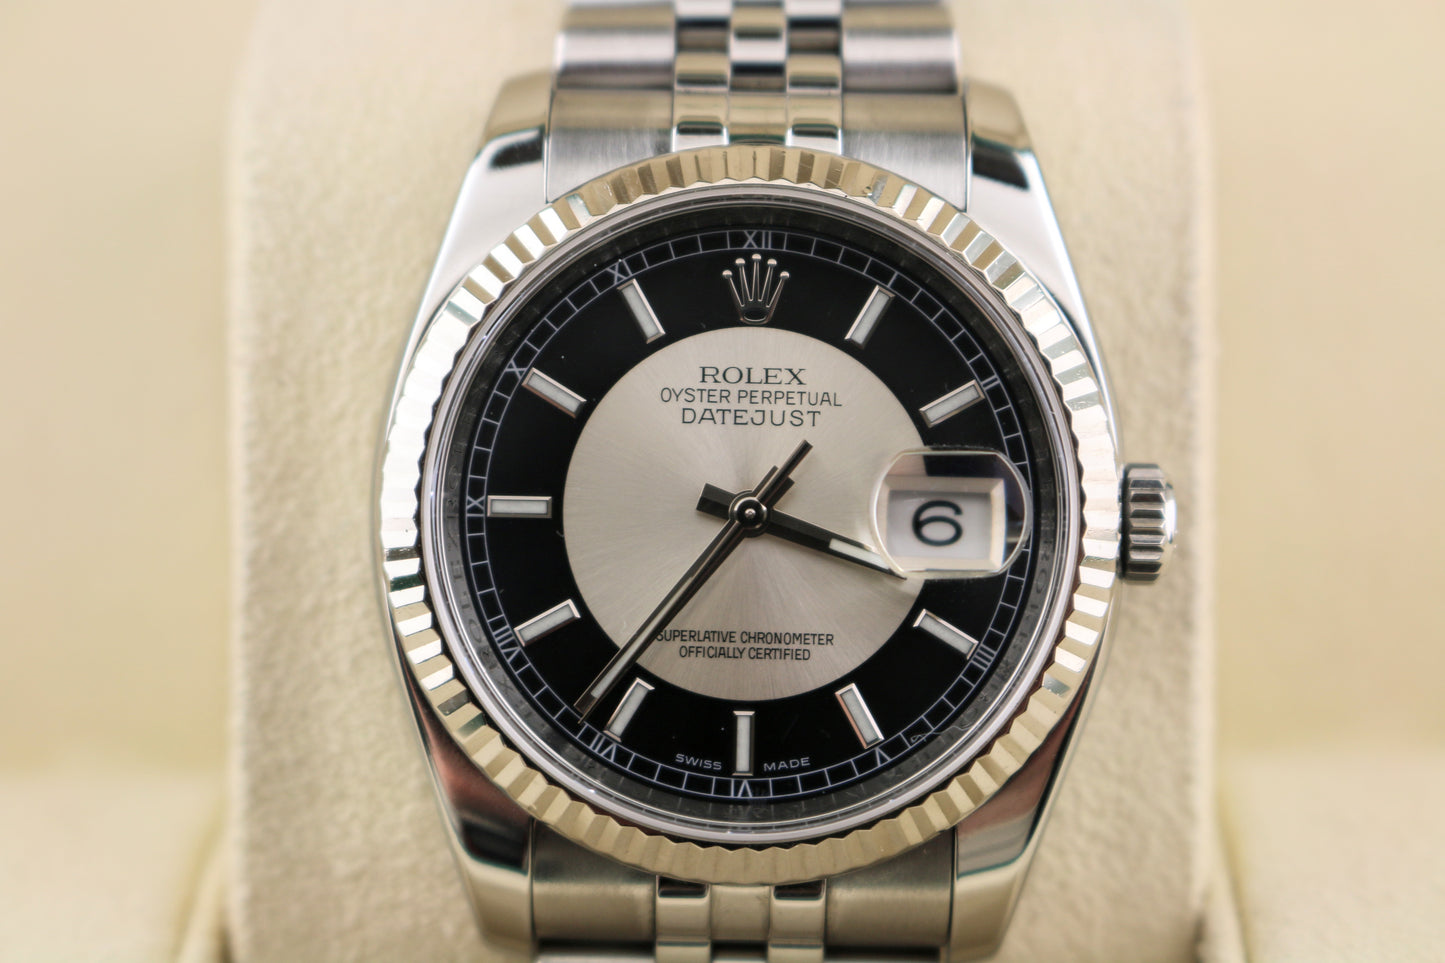 2014 Rolex Datejust 116234 Black Silver Tuxedo Dial SS Jubilee No Papers 36mm